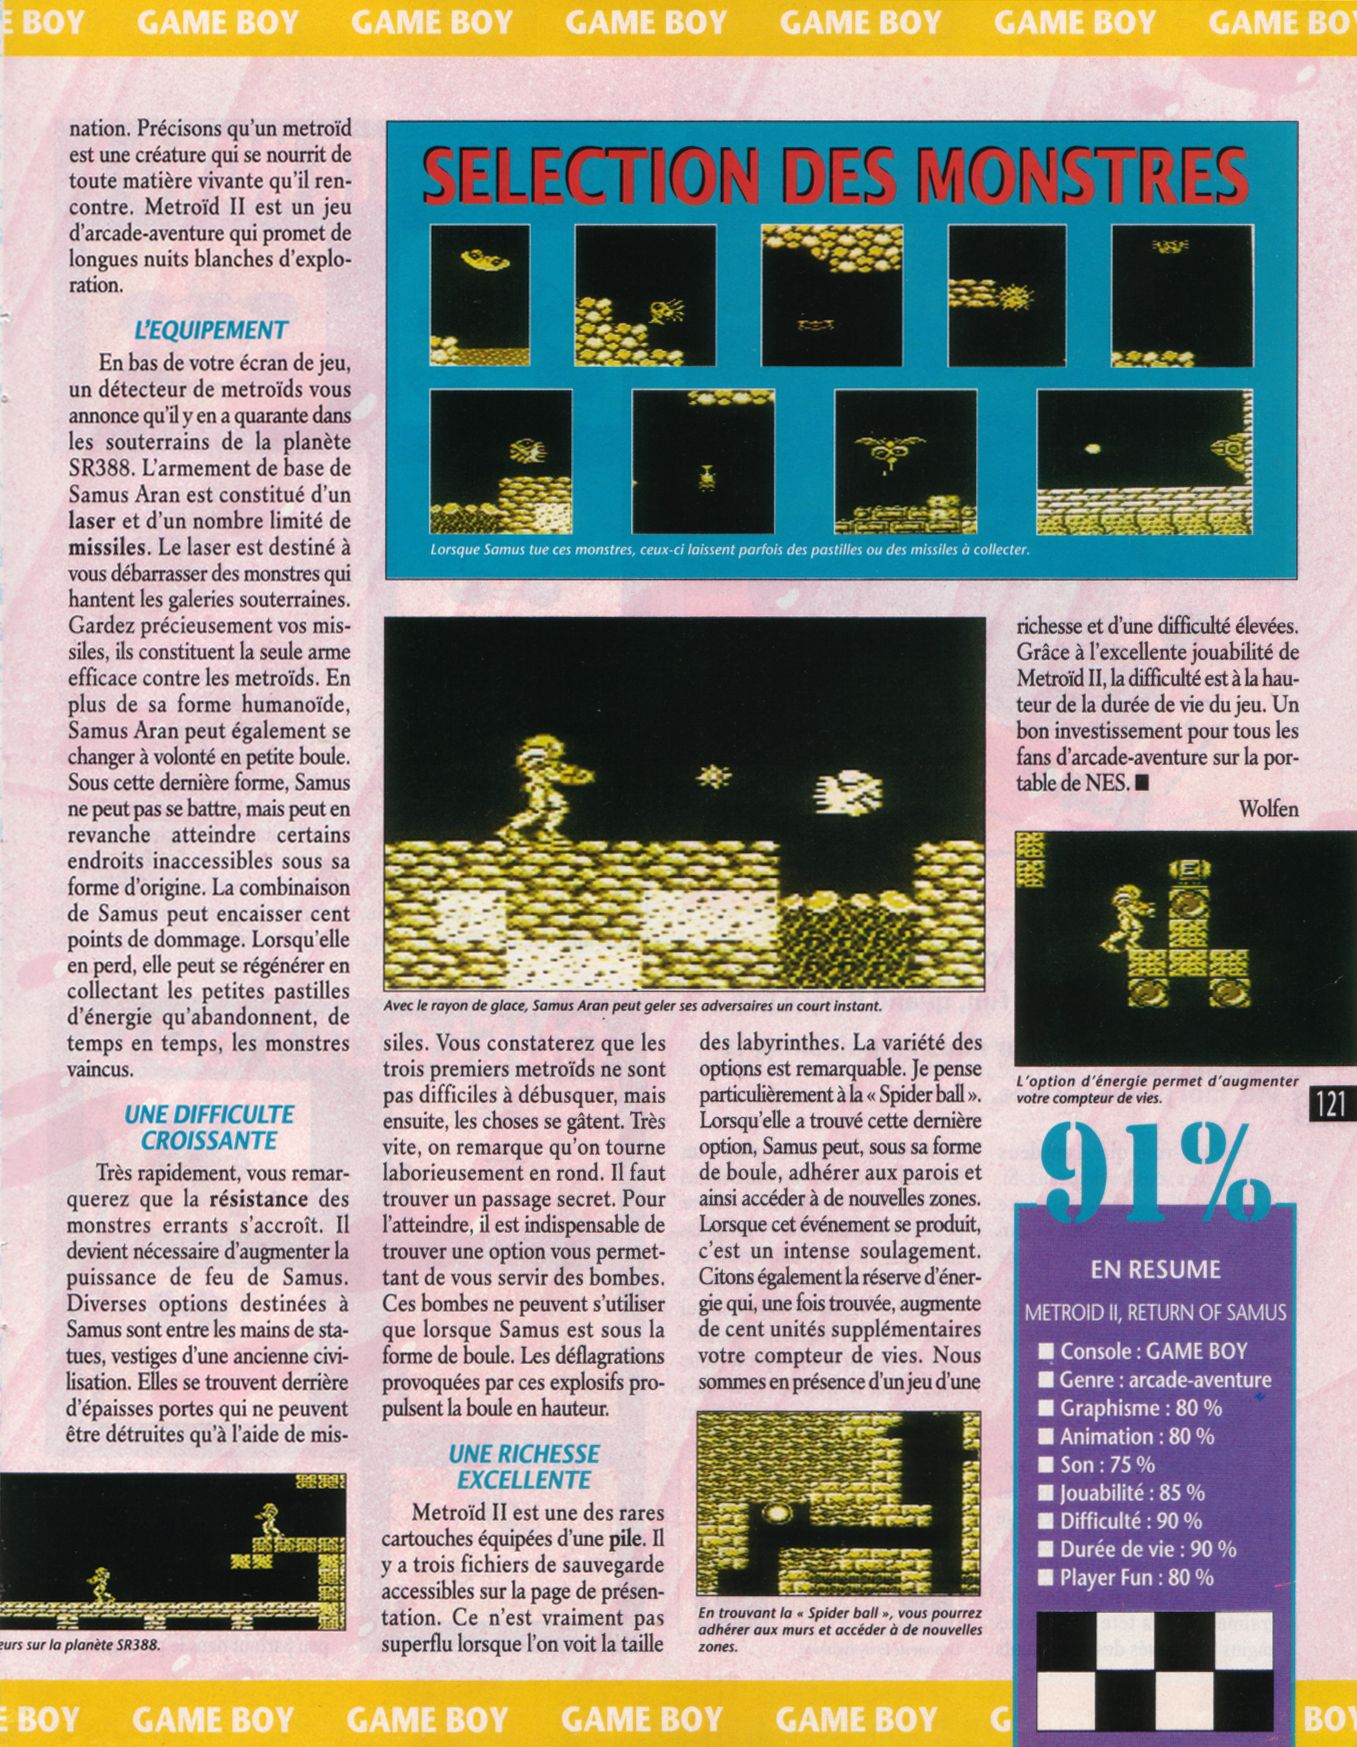 tests//997/Player One 022 - Page 121 (1992-07-08).jpg